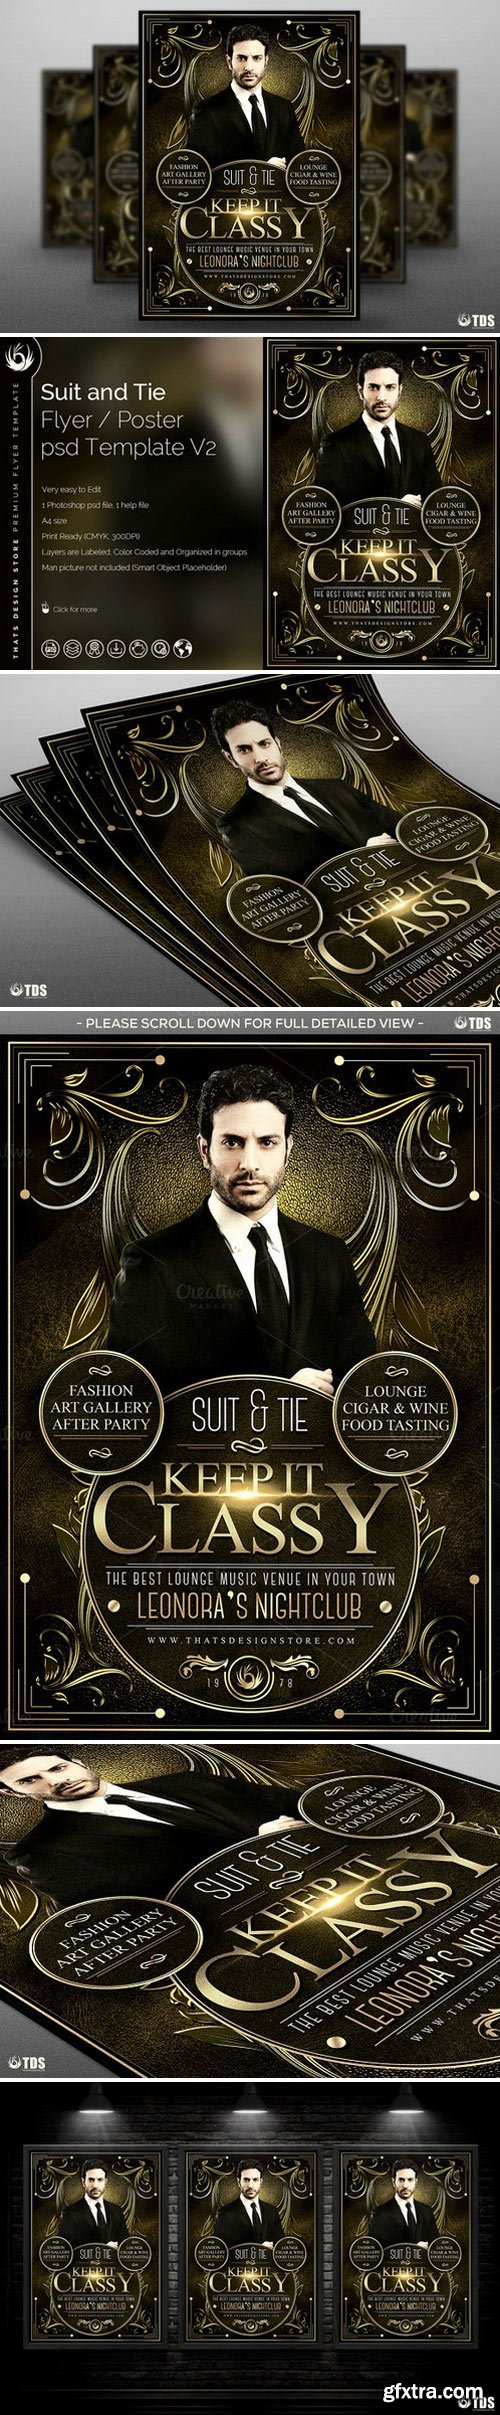 CM - Suit and Tie Flyer Template V2 566254